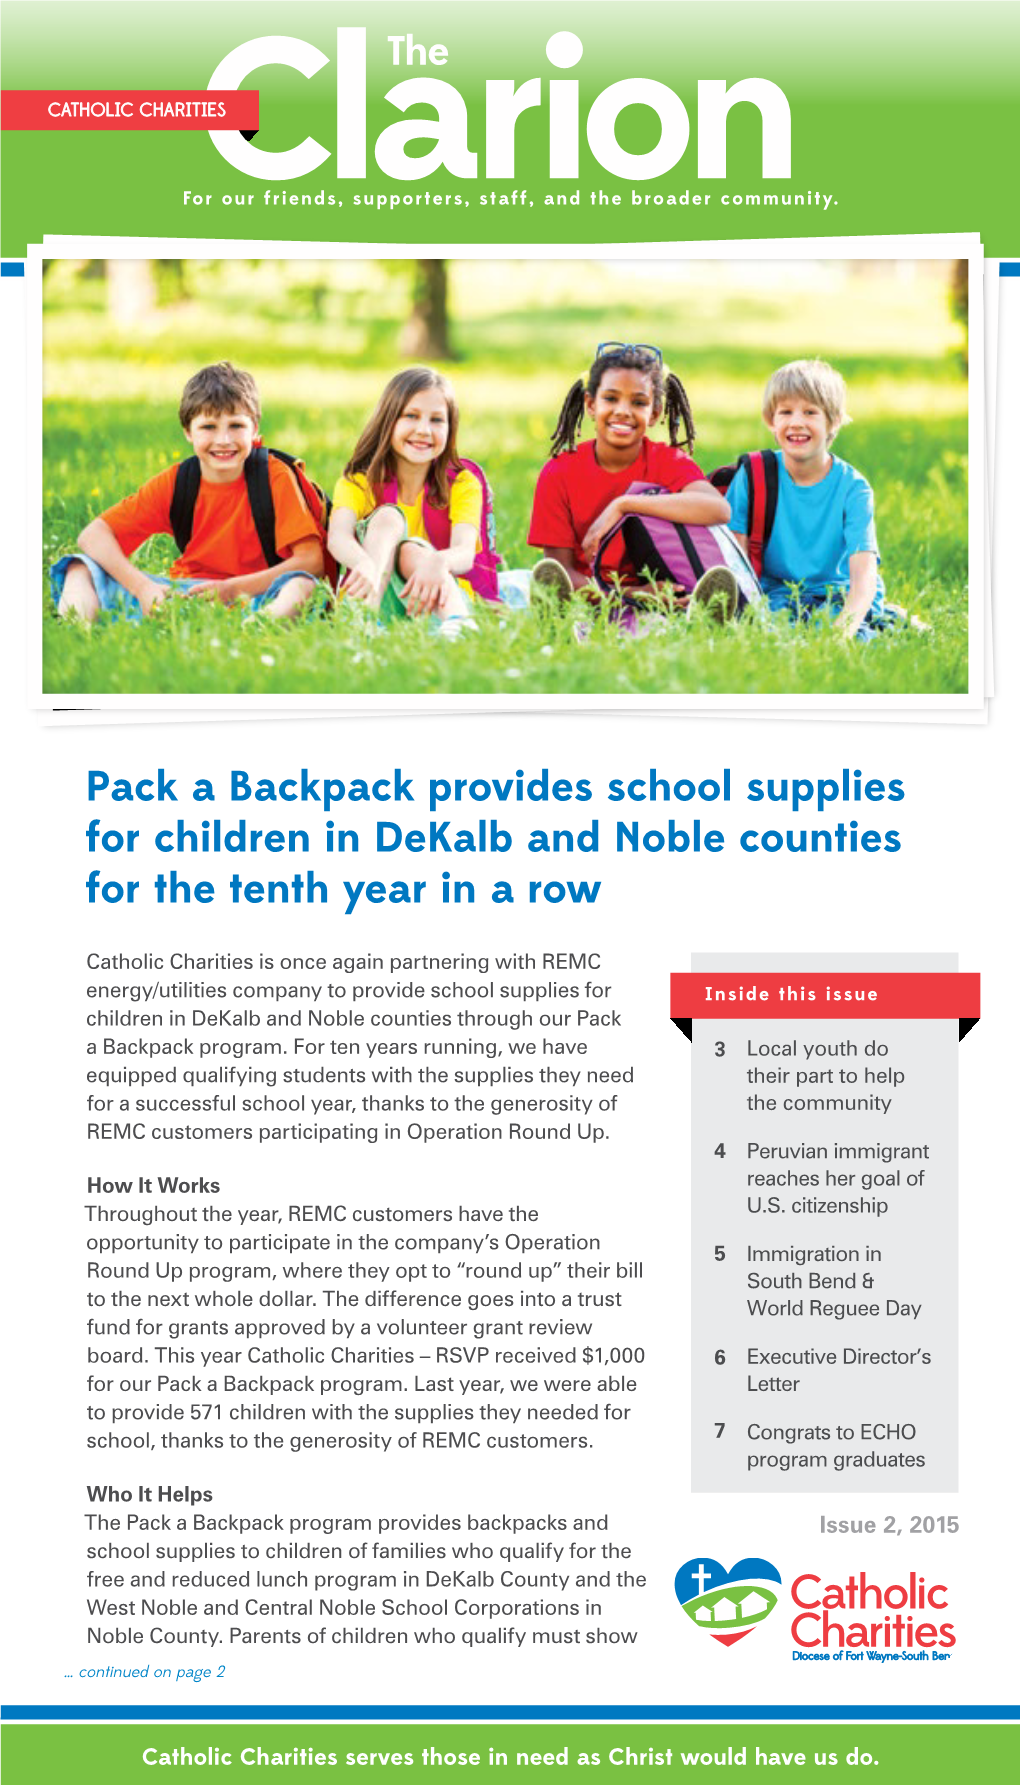 Pack a Backpack Provides School Supplies for Children in Dekalb and Noble Counties for the Tenth Year in a Row